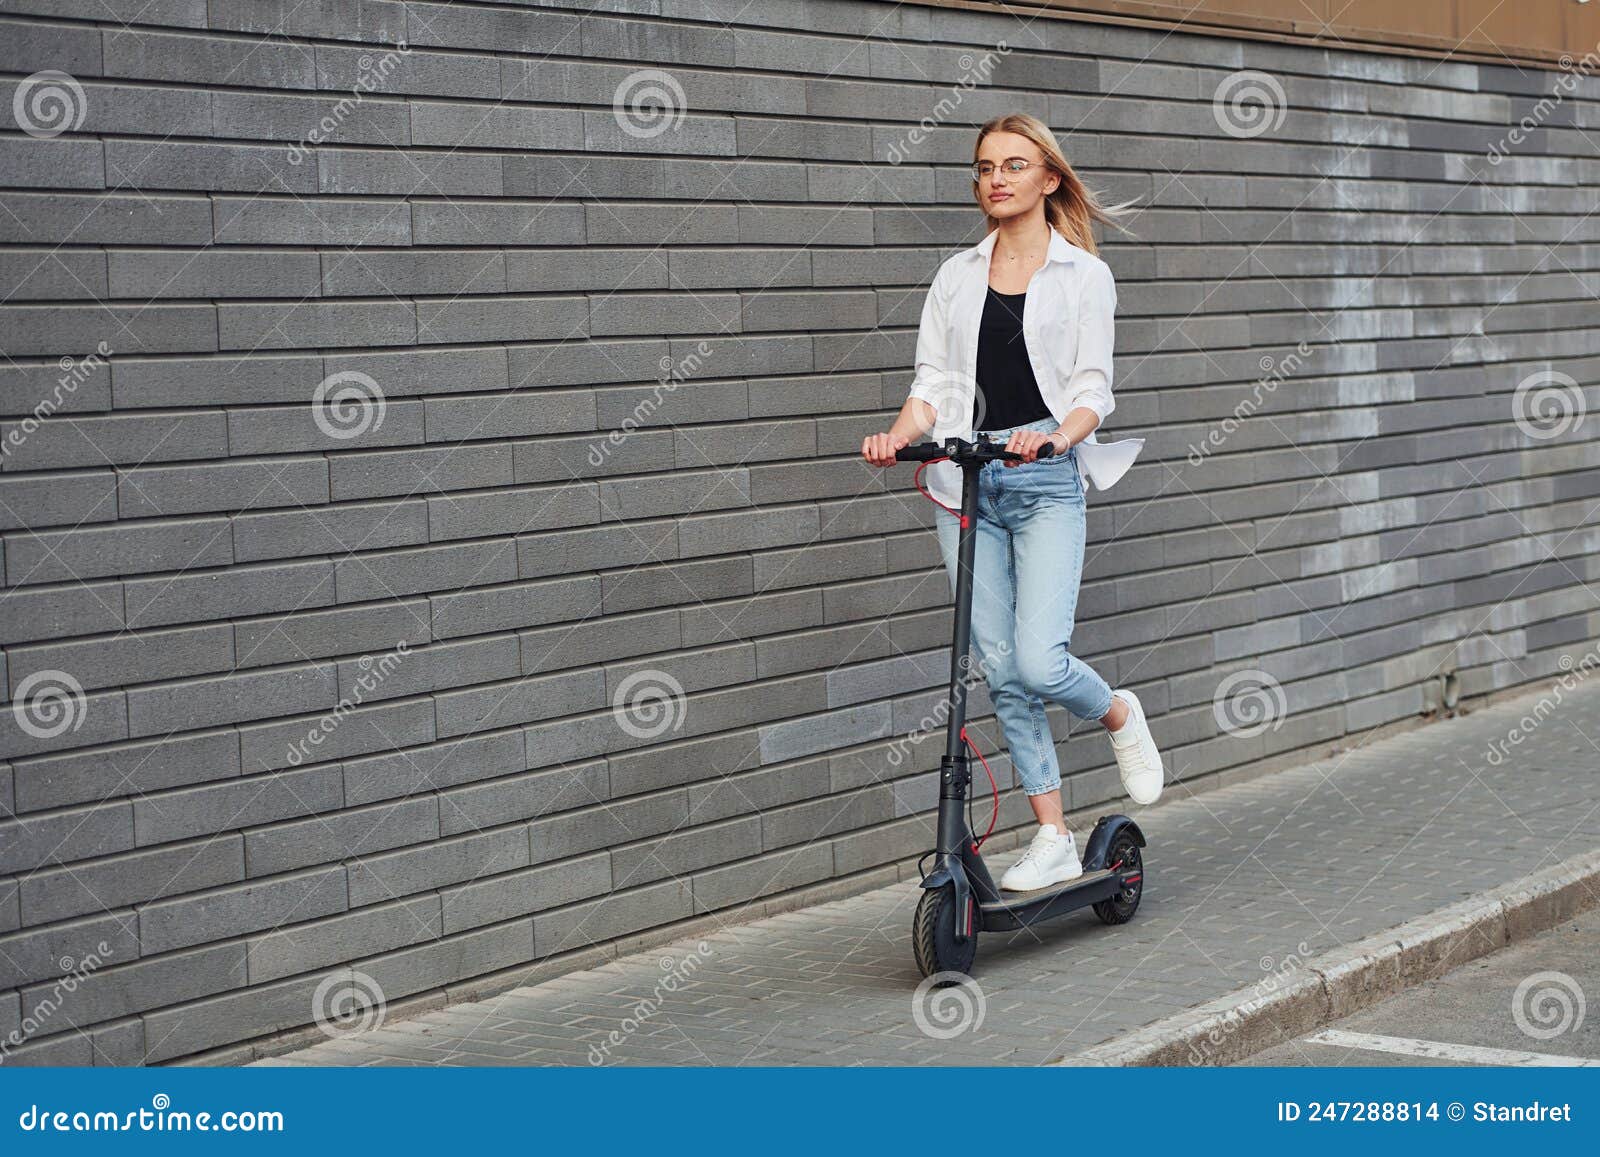 Beautiful Blonde In Casual Clothes Riding Electric Schooter Outdoors At Sunny Daytime Stock